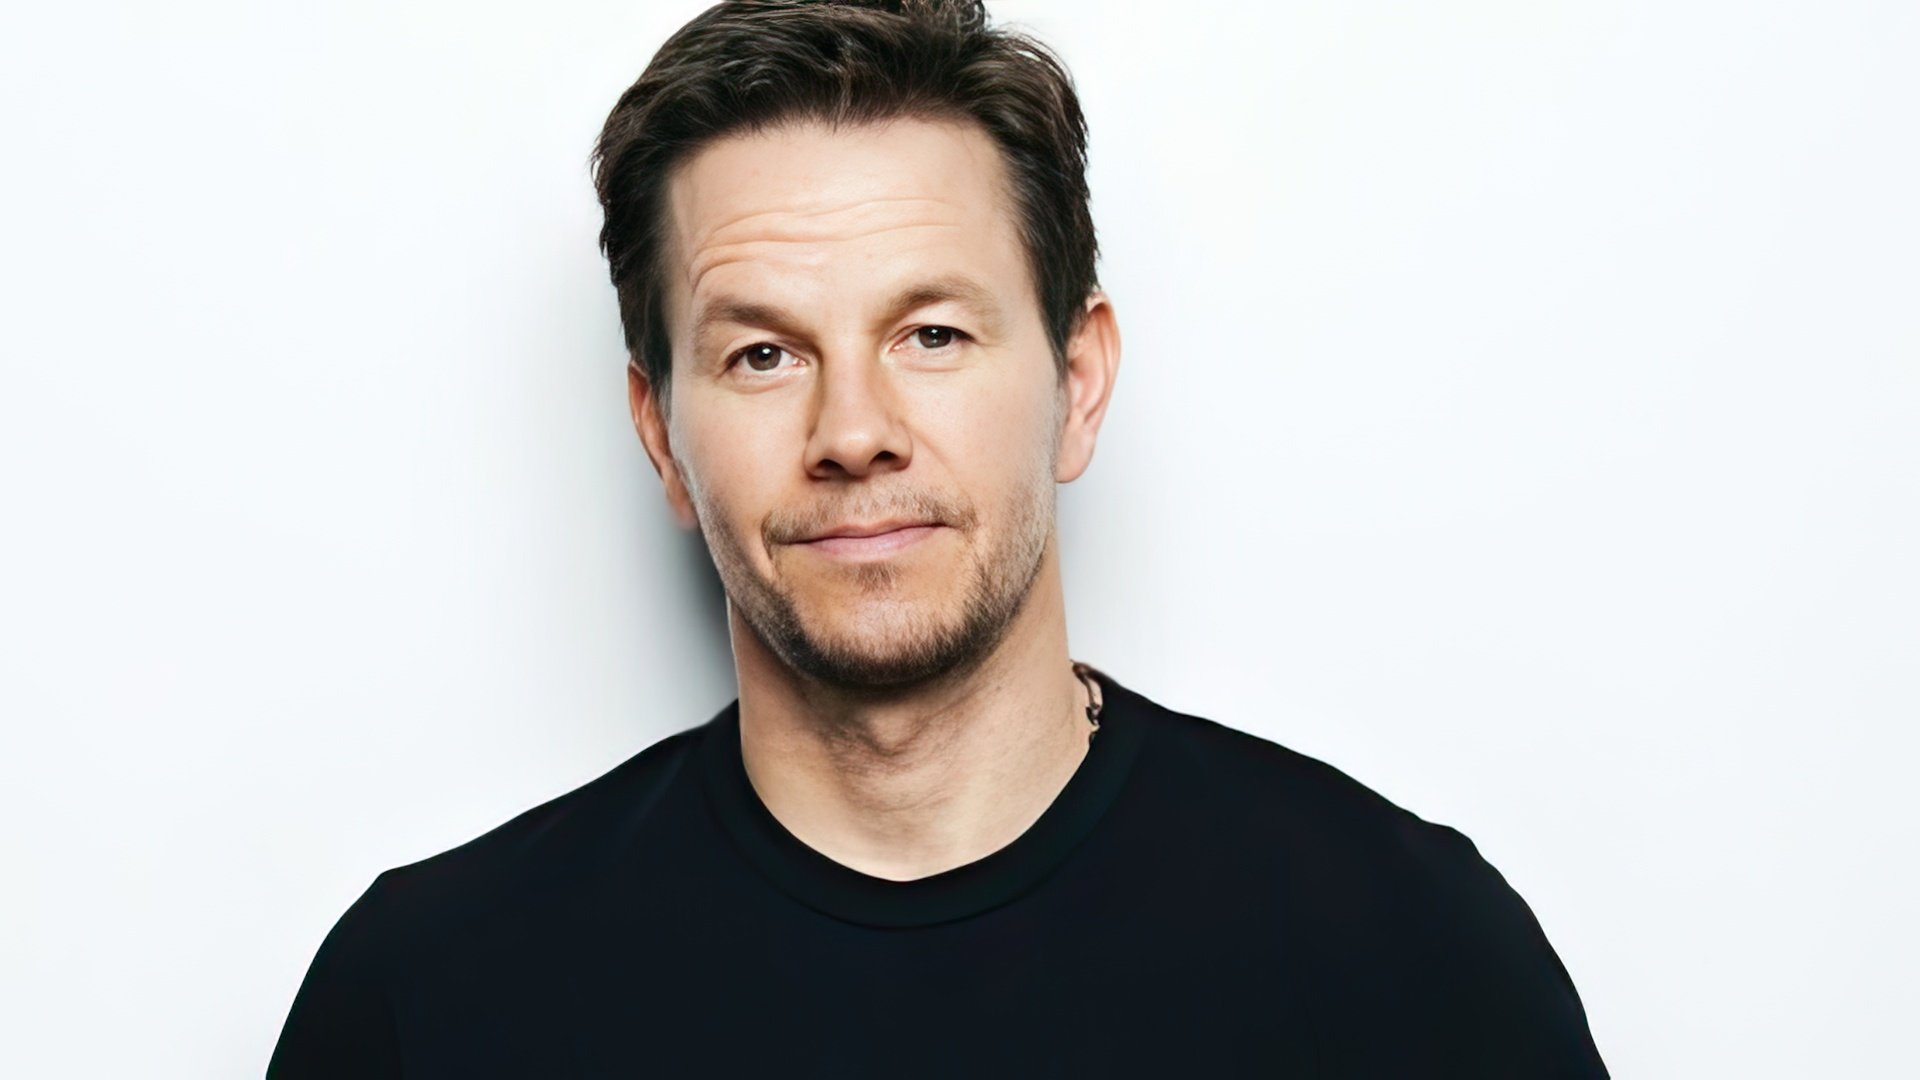 Mark Wahlberg, a Hollywood celebrity with some wild past